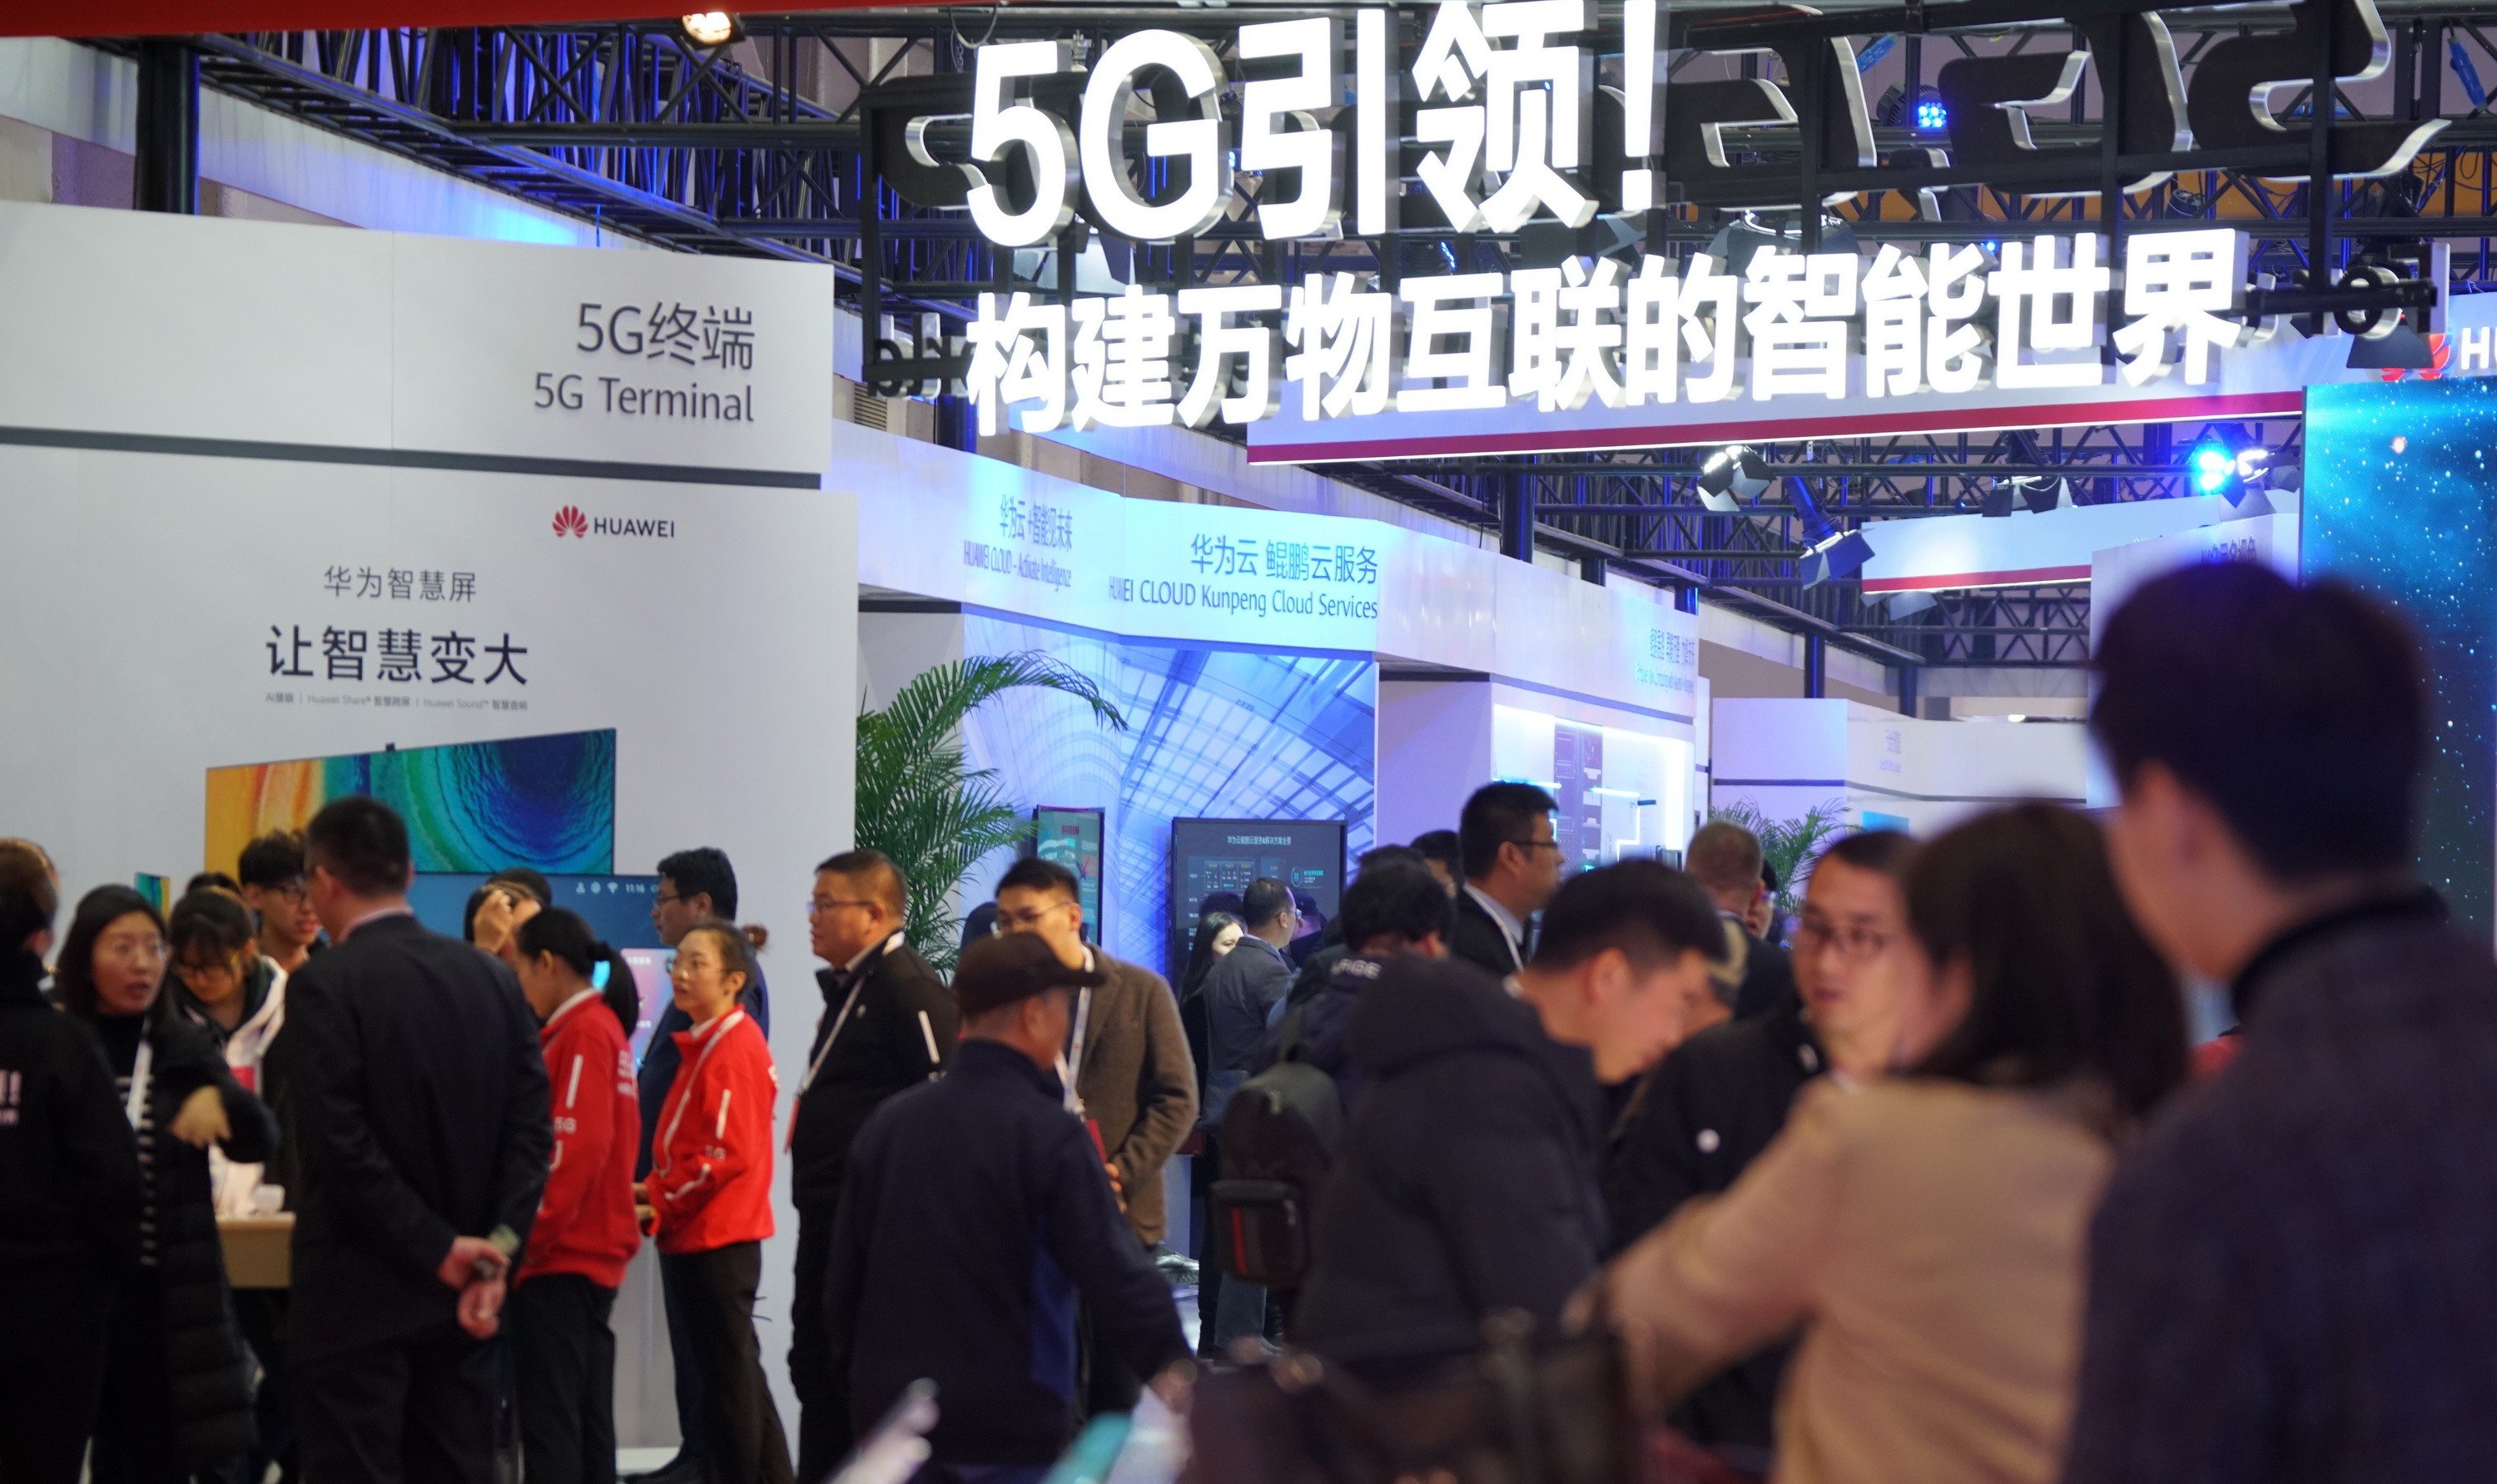 Visitors look at the 5G intelligent system exhibition booth of Huawei at the World 5G Convention in Beijing, Nov. 21, 2019. Photo: Xinhua